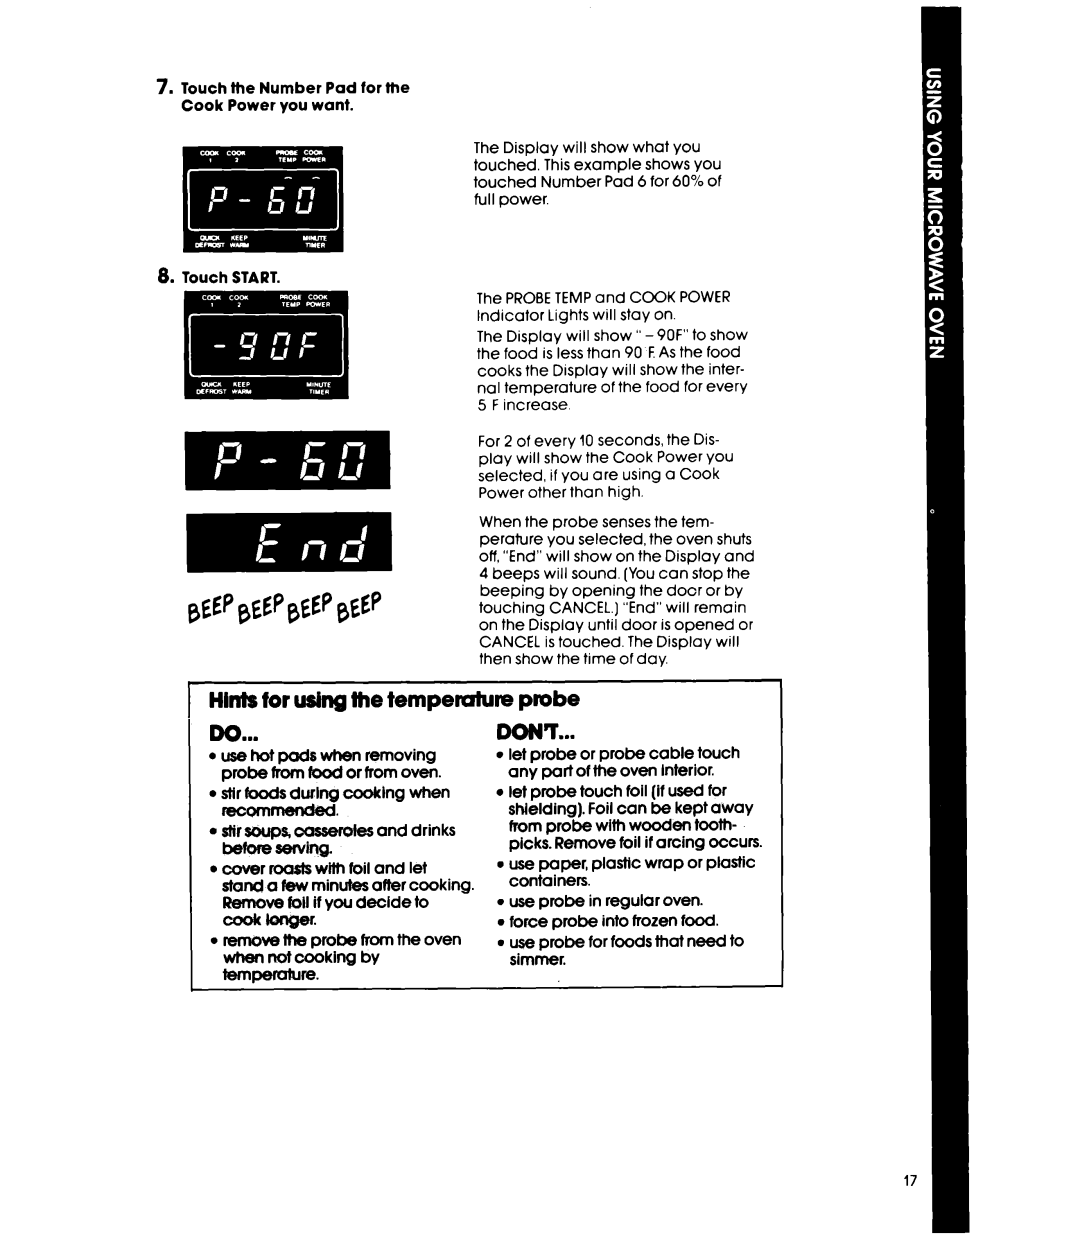 Whirlpool MW8570XR manual Hints for using the tempemture Do, probe DONT, l stir foods during cooking when reo 